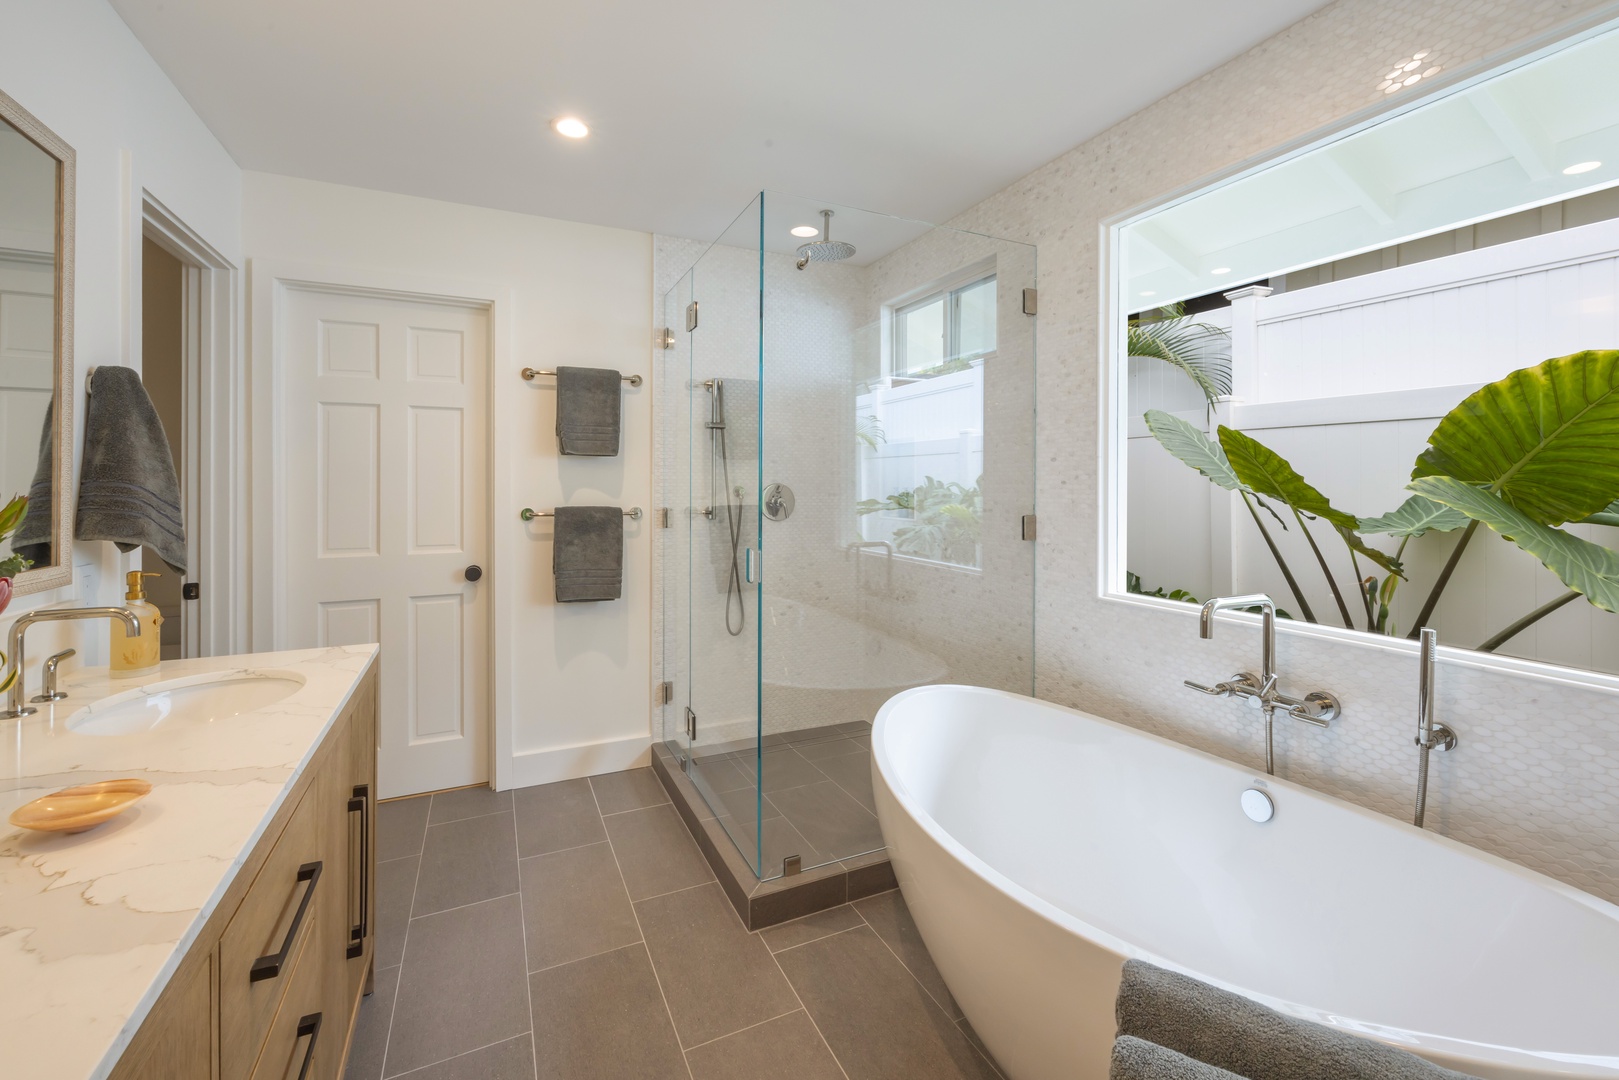 Kailua Vacation Rentals, Lanikai Ola Nani - Indulge in the ensuite bath, featuring a spacious bathtub for ultimate relaxation, wide vanity area and a walk-in shower in a glass enclosure.